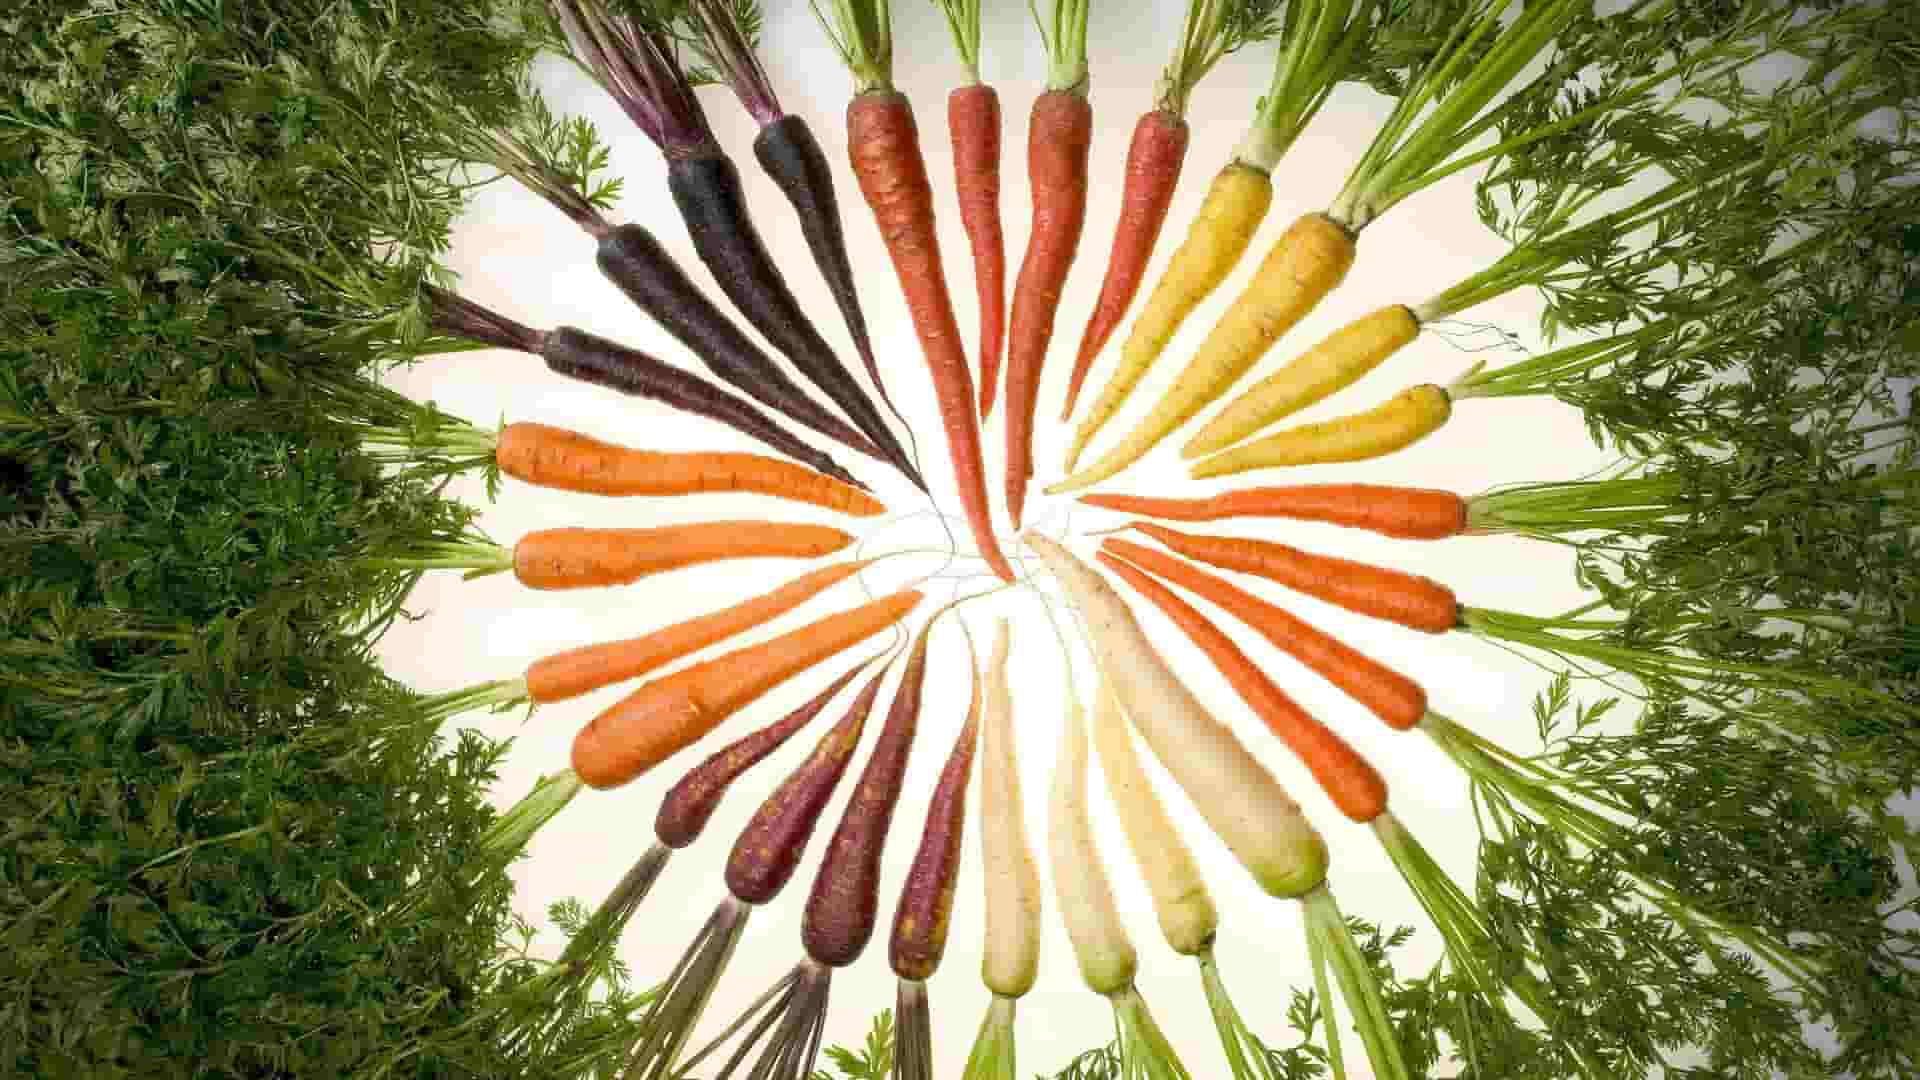 Food_Set_of_different_colors_carrots_099550_